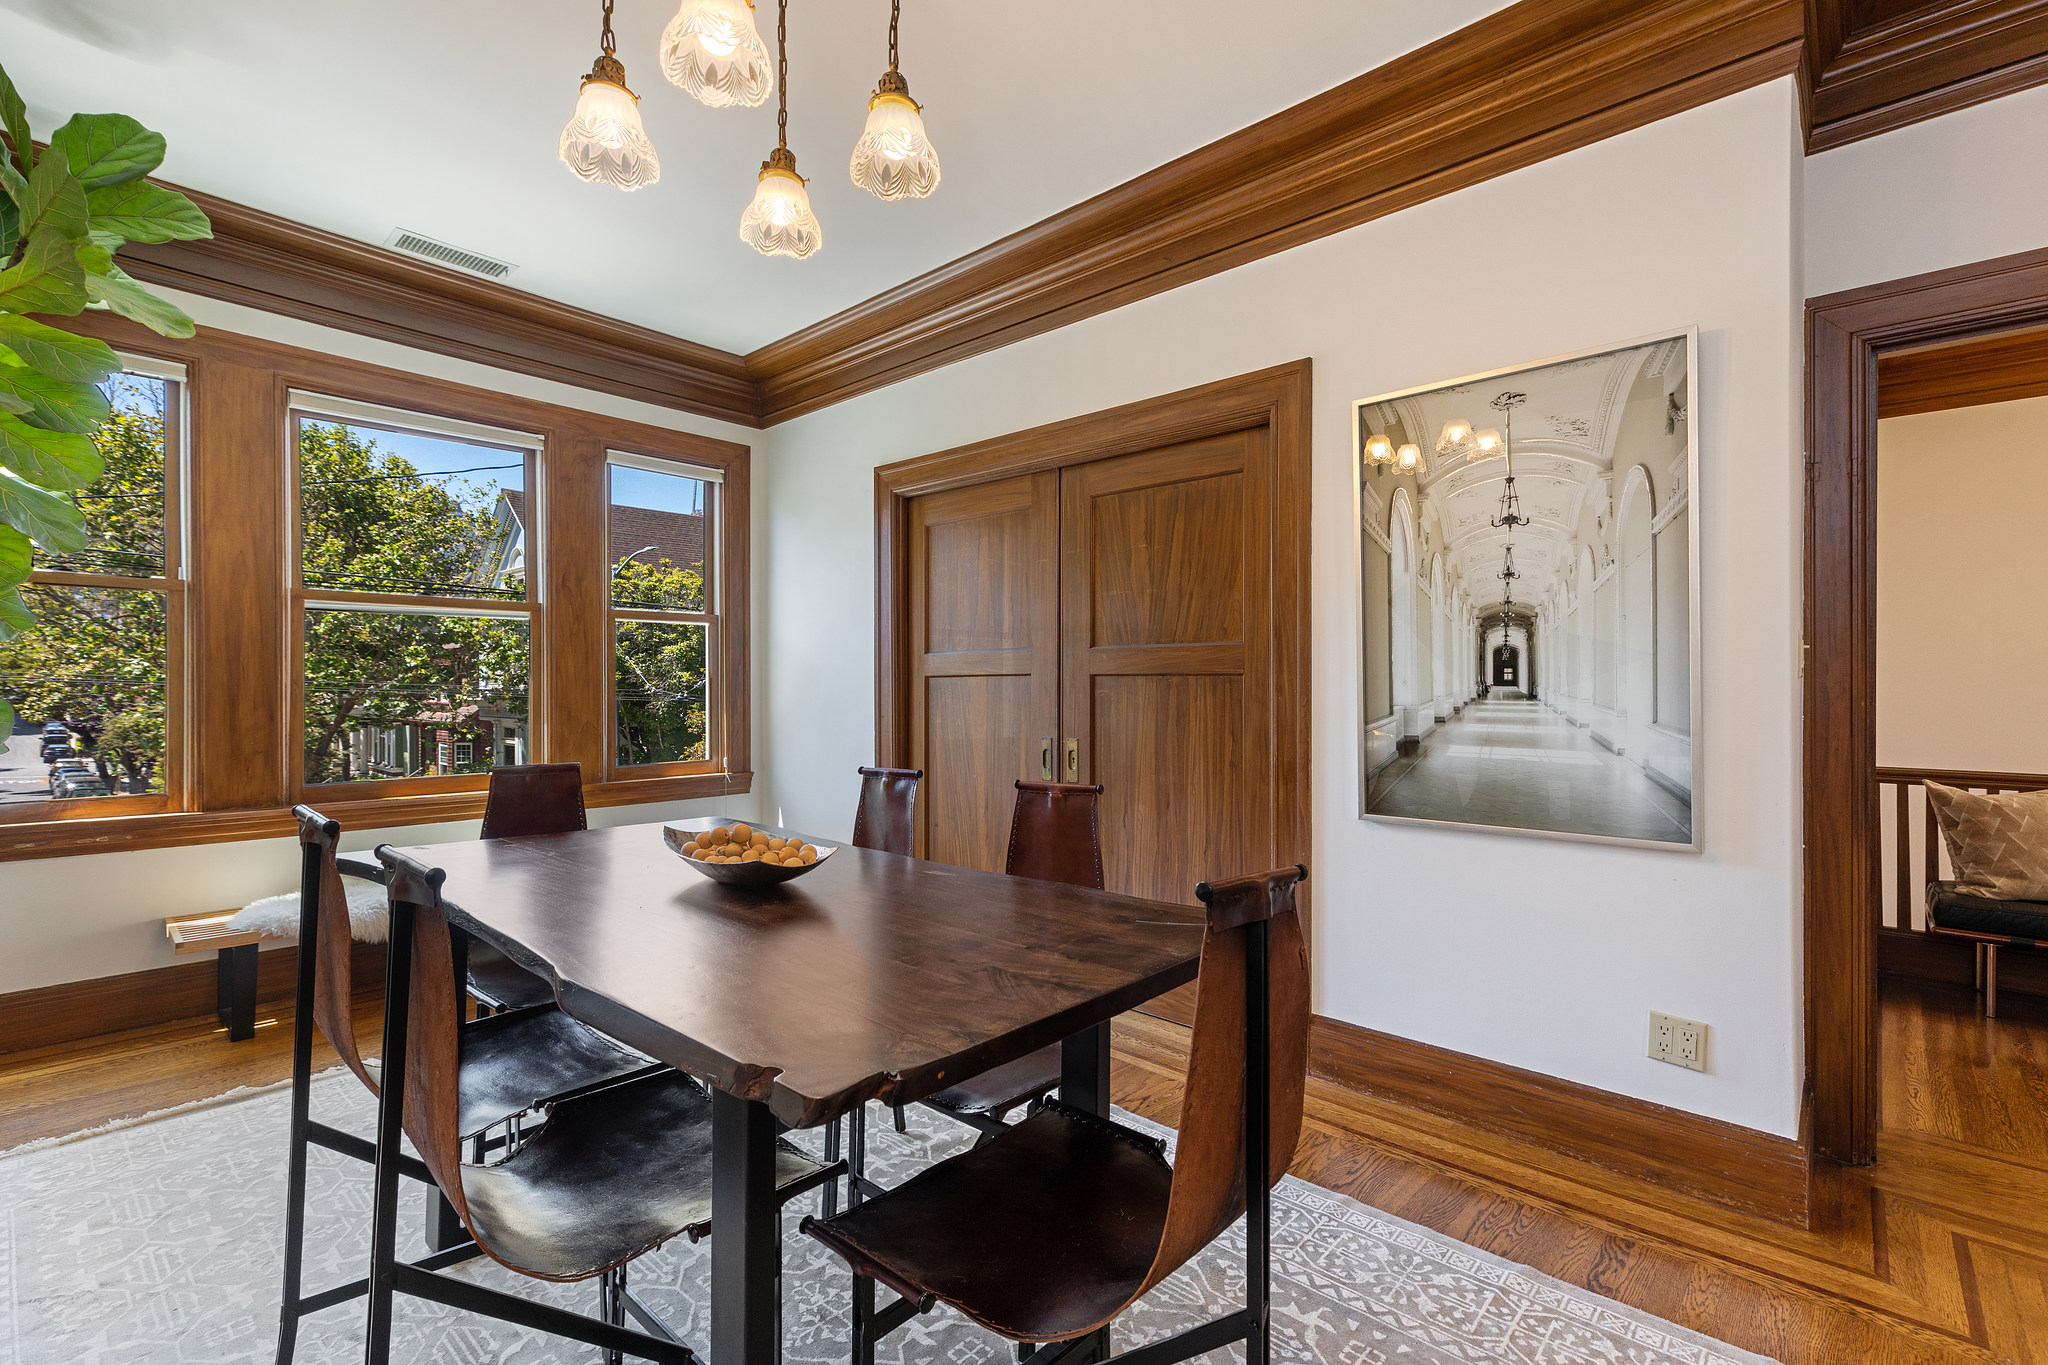 Property Photo: Dining room, showing closed pocket doors